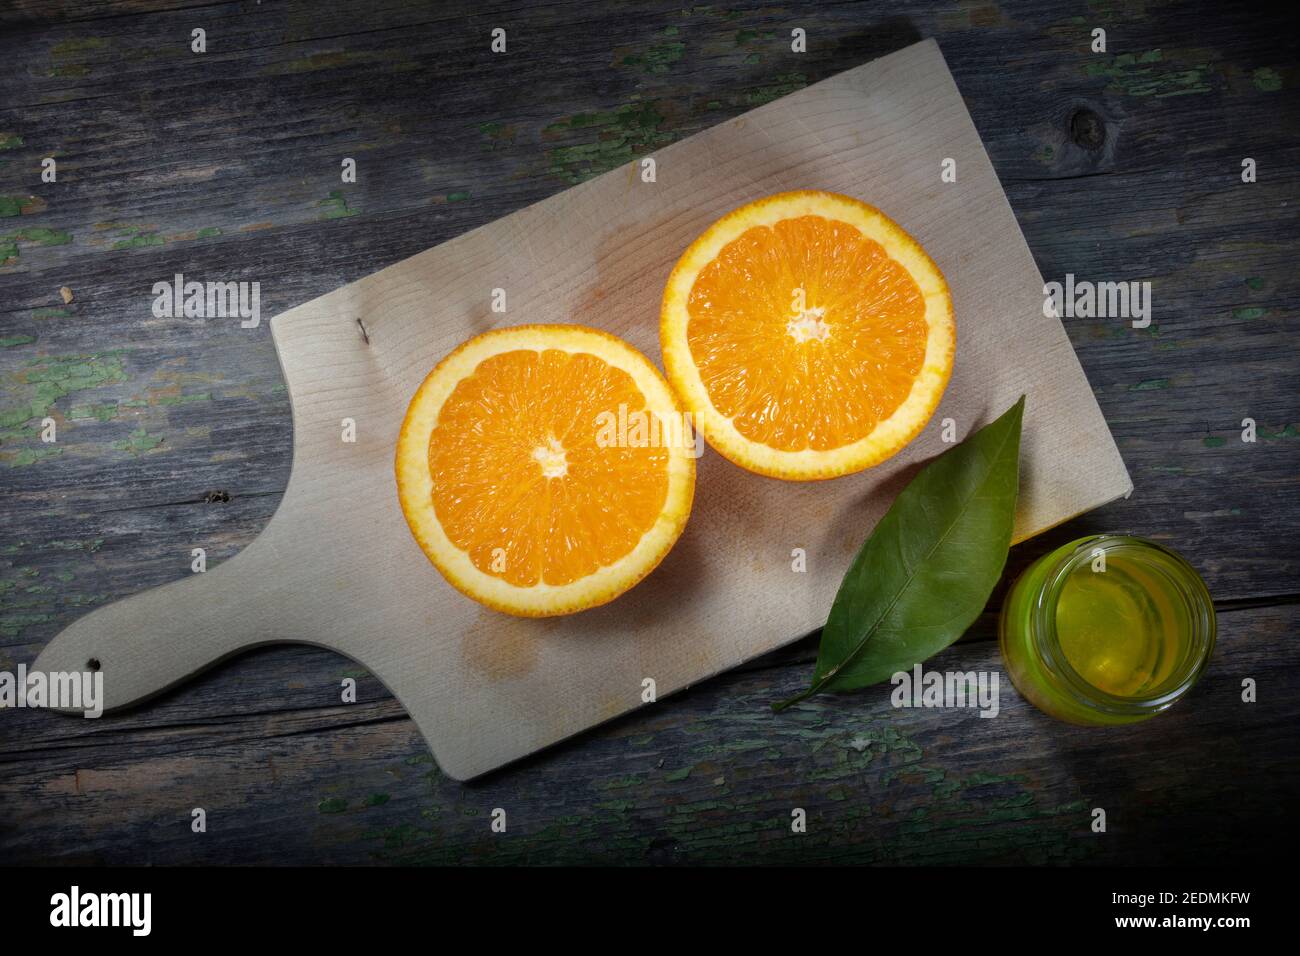 Still Life Macro Photo. Half Sliced Oranges on a Cutting Board. Small Jar of Olive Oil and Orange Leave as Decoration Stock Photo